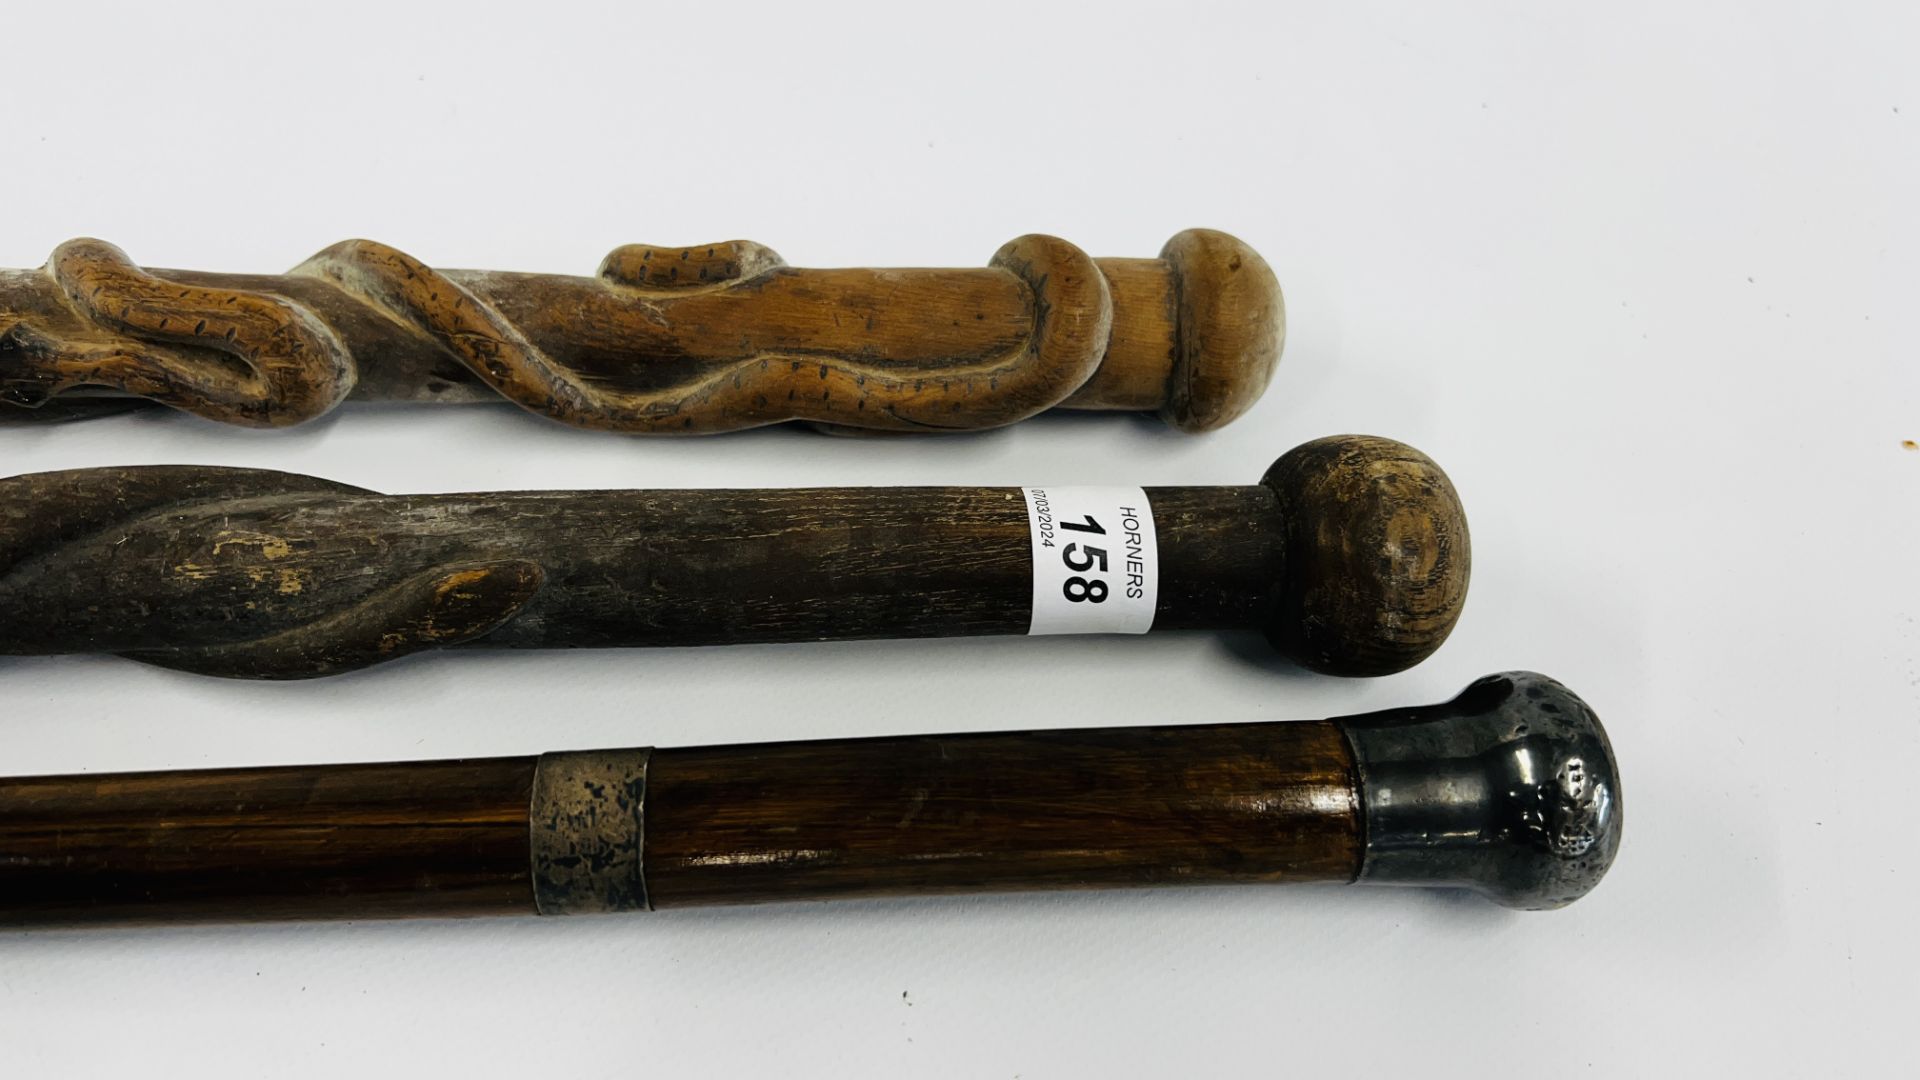 TWO C19th CARVED WALKING STICKS ONE OF SNAKE DESIGN + A VINTAGE SILVER TOP WALKING CANE. - Image 2 of 5